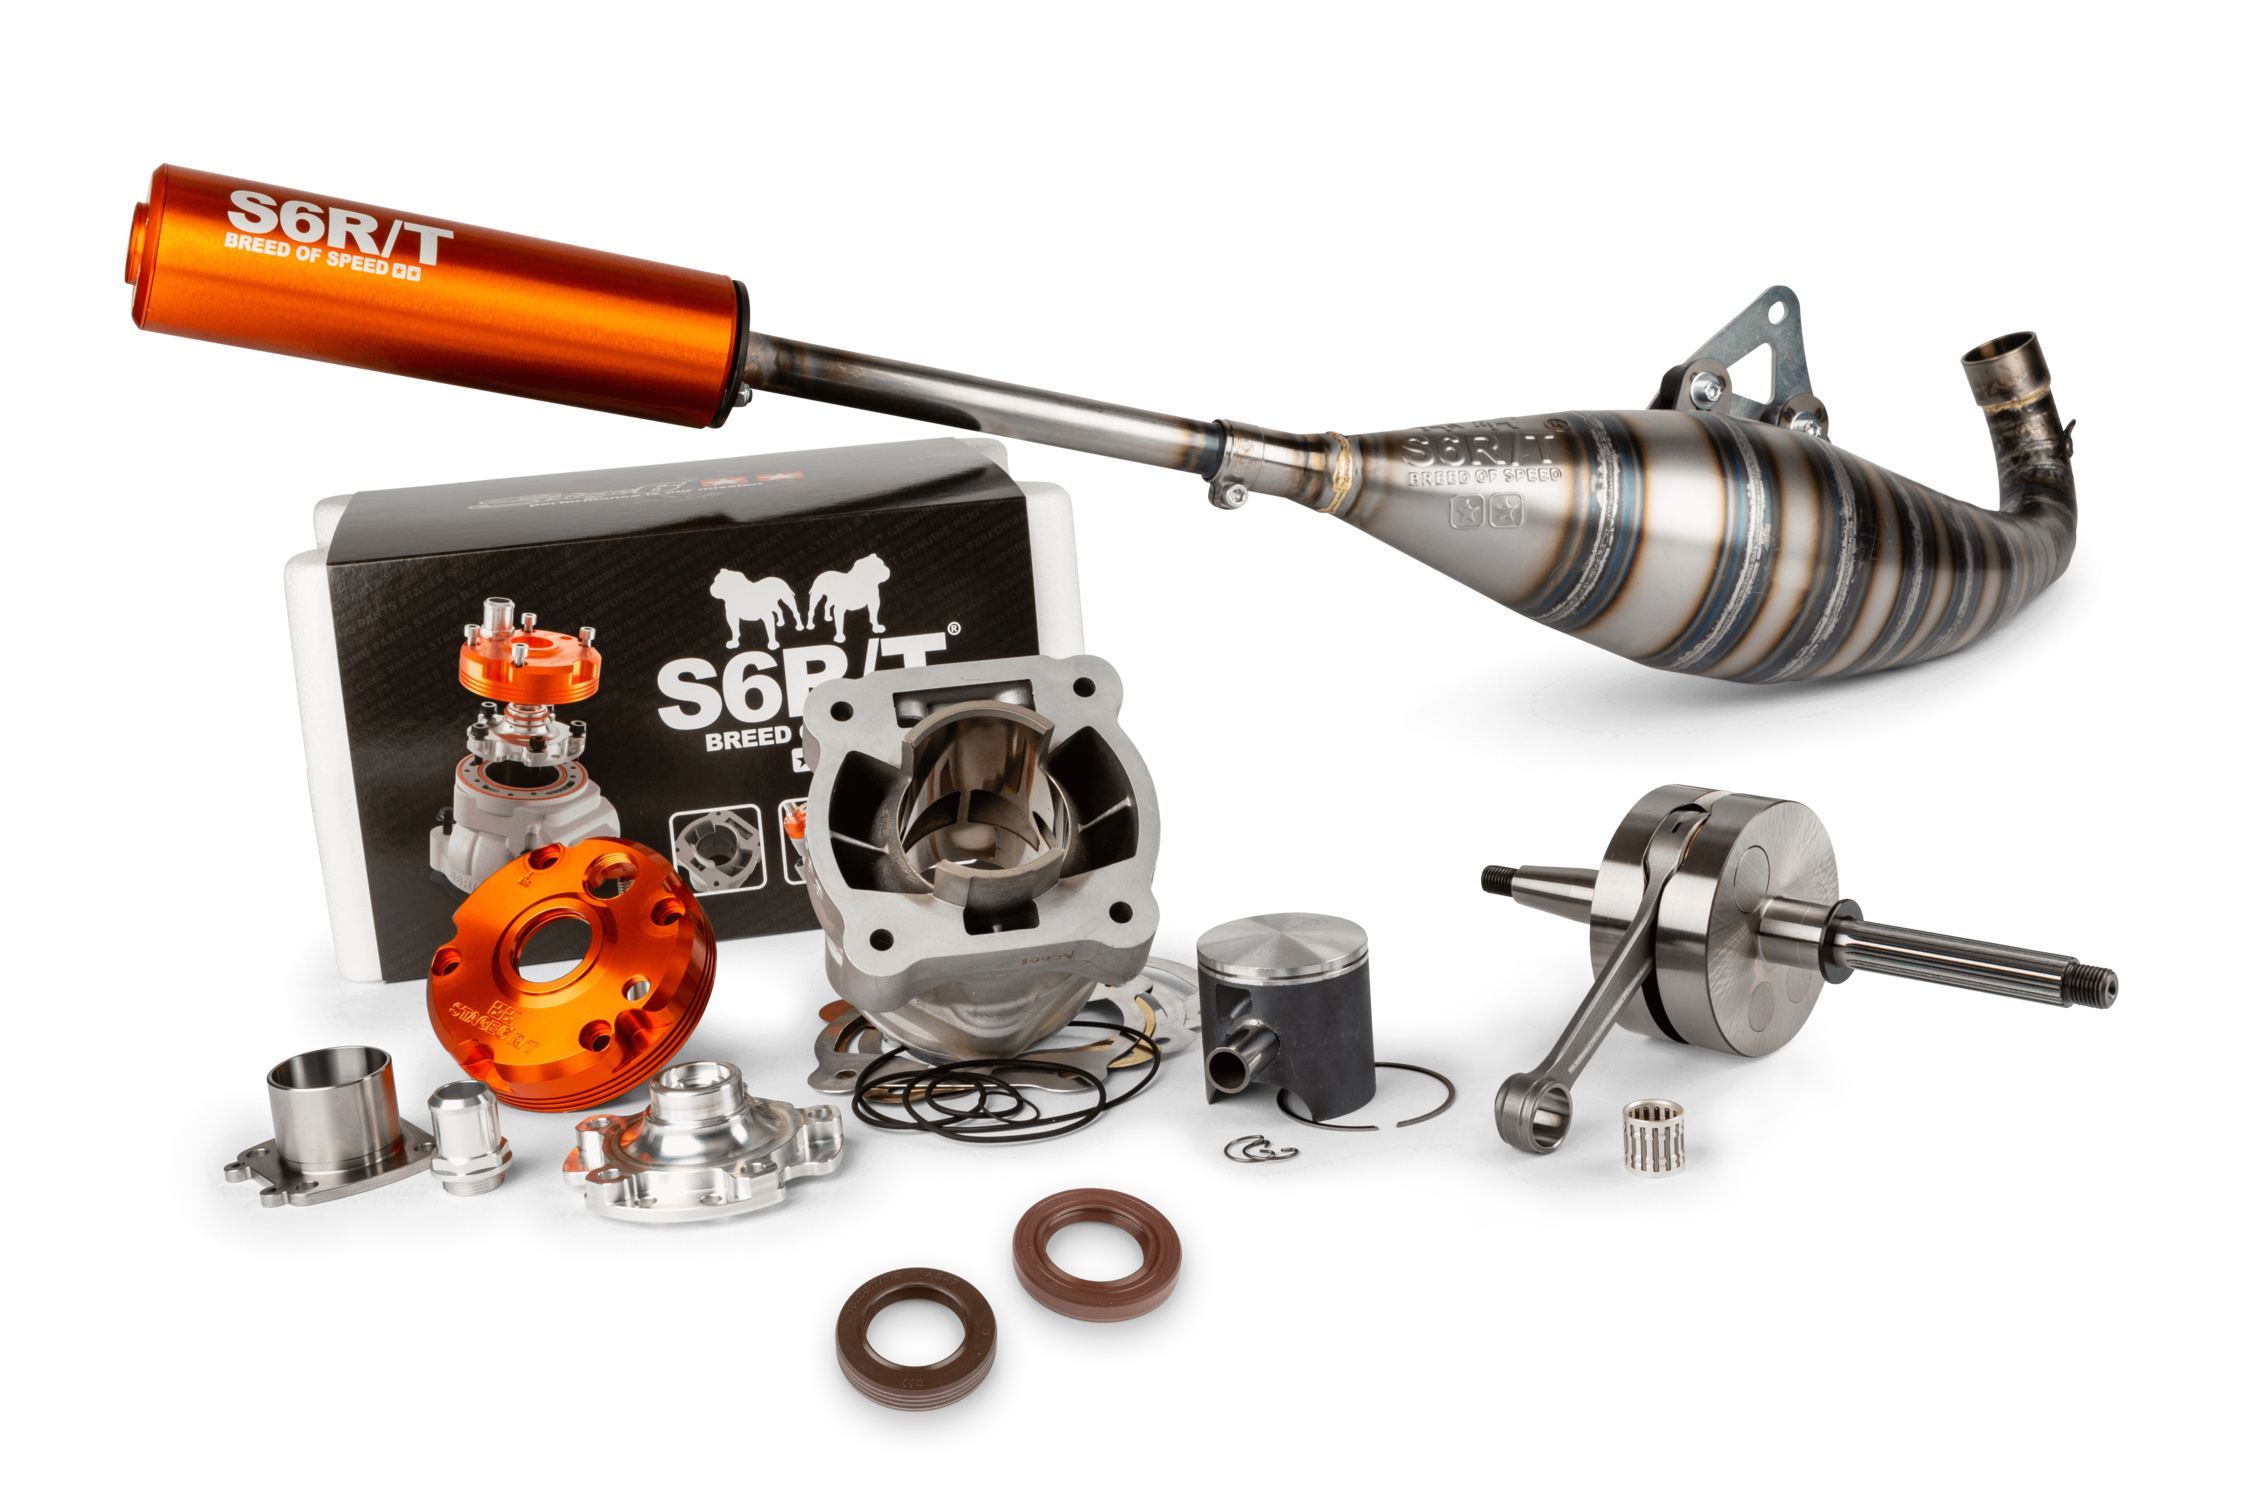 Stage6 R/T FL100 Cylinder now Available as Tuning Kit - Blog actu